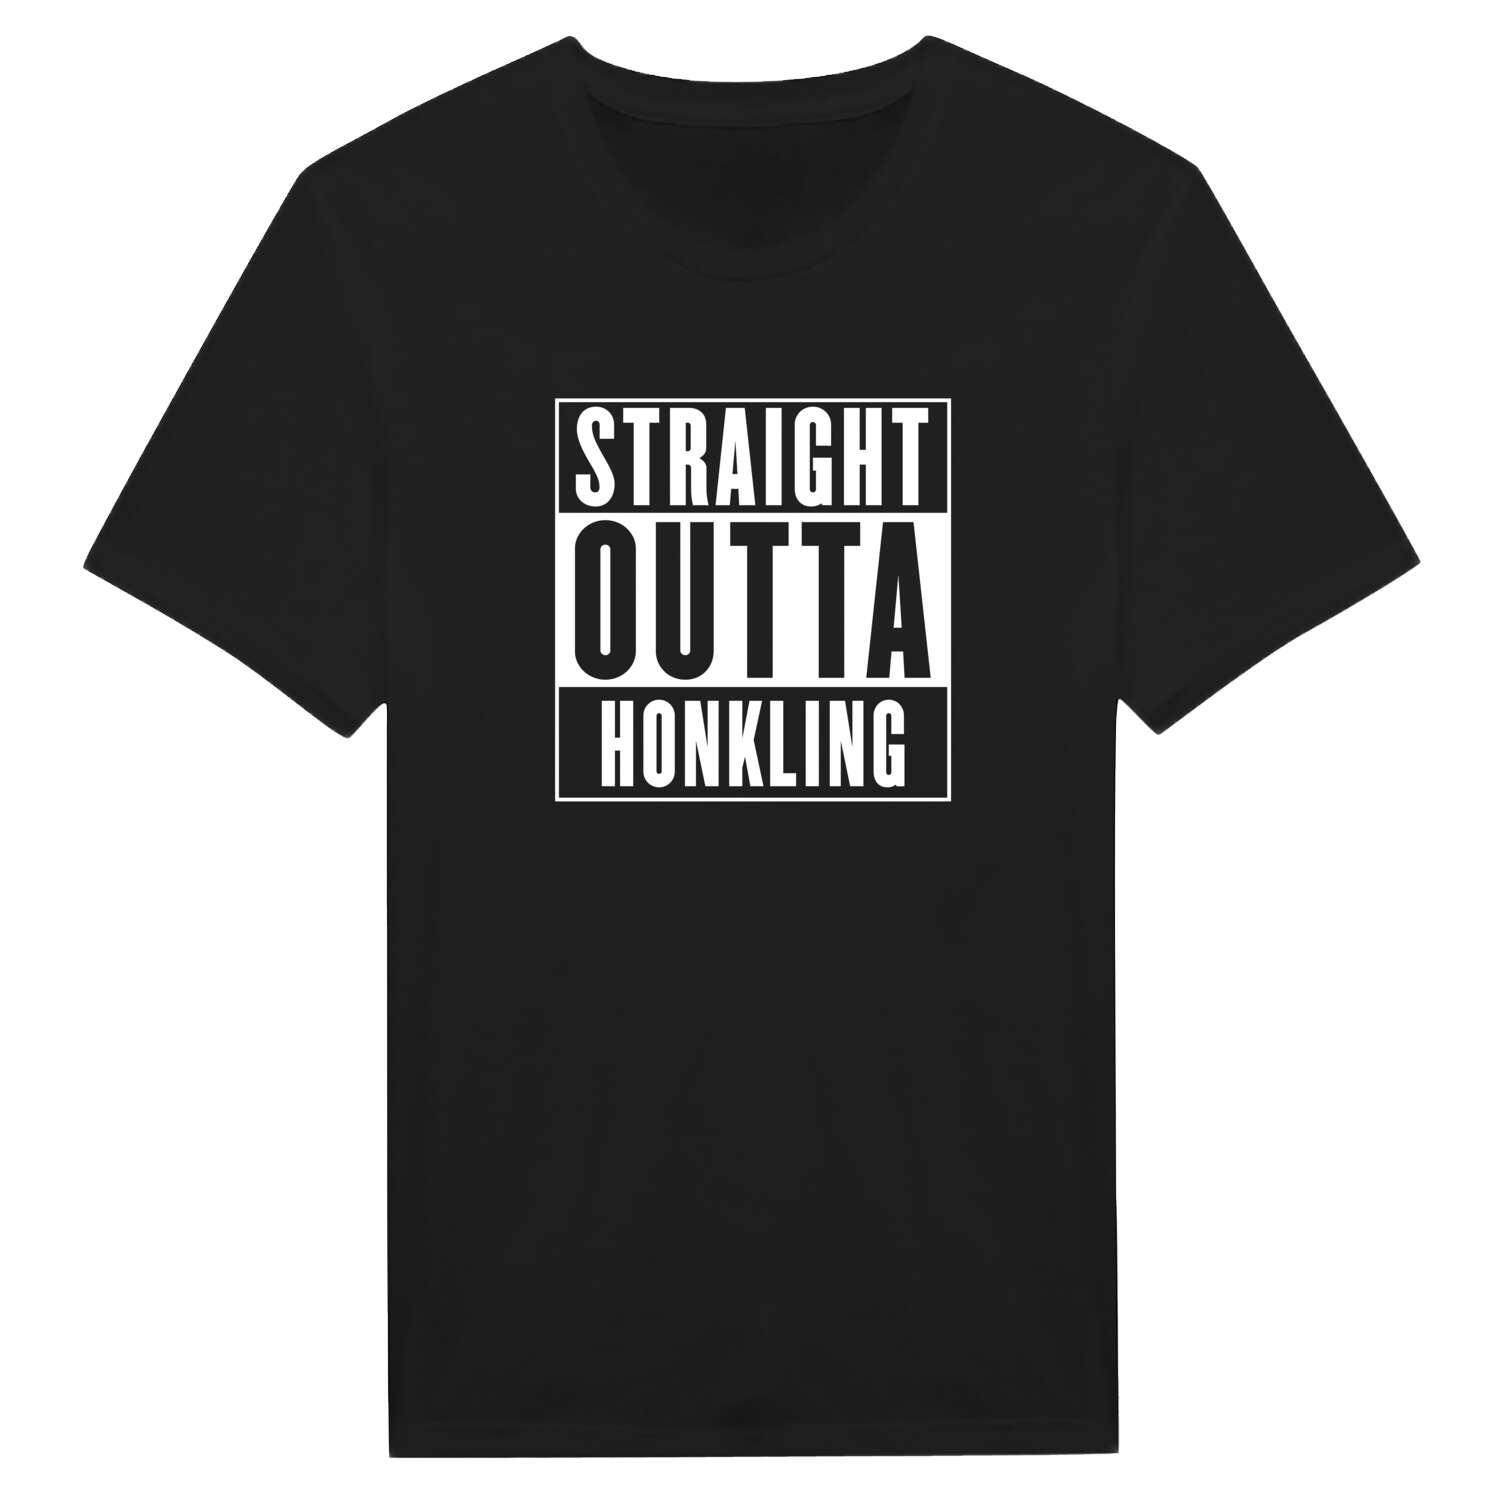 Honkling T-Shirt »Straight Outta«